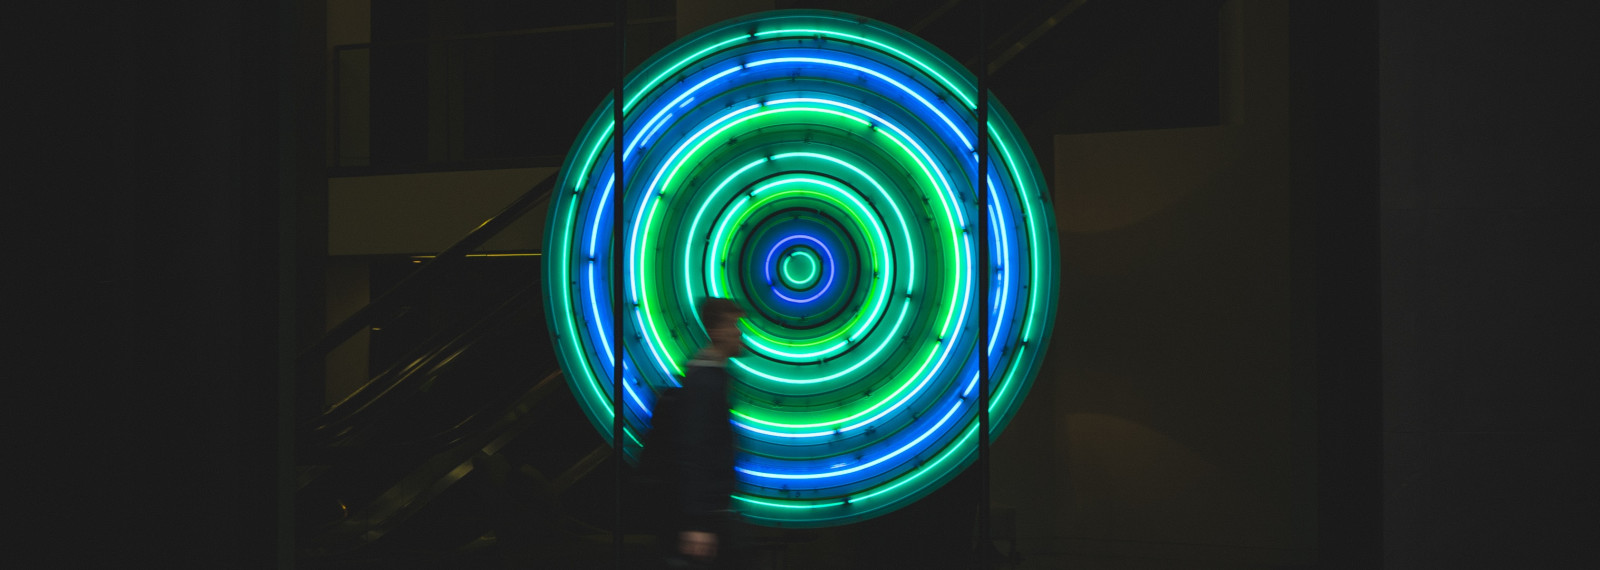 Image of circular LED lights in a shop window with a person walking in front of it